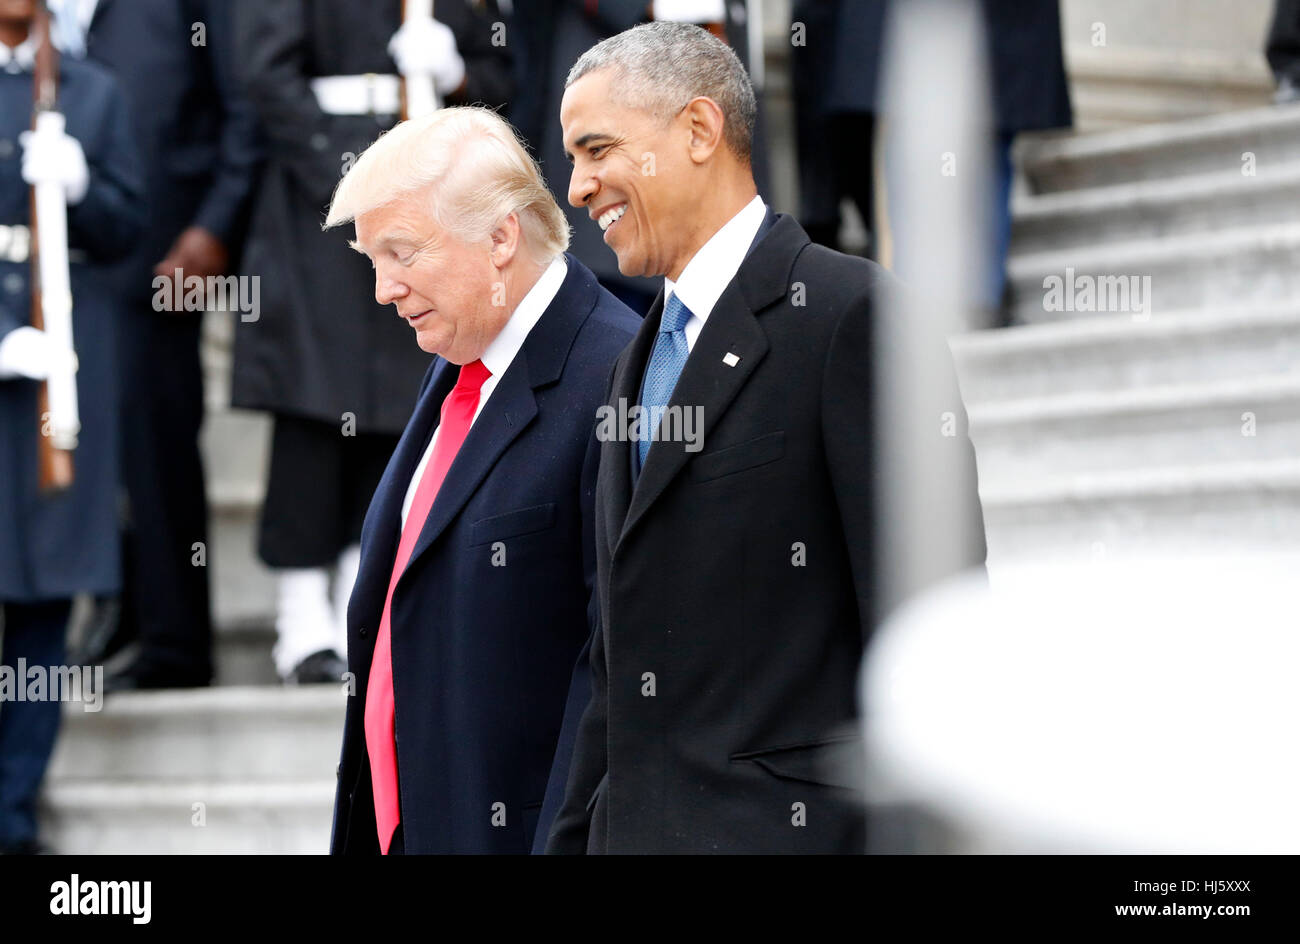 Former President of the United States Barack Obama and United States President Donald Trump smile as they walk down the east front steps of the Capitol Building after Trump is sworn in at the 58th Presidential Inauguration on Capitol Hill in Washington, DC on January 20, 2017. Credit: John Angelillo/Pool via CNP /MediaPunch Stock Photo